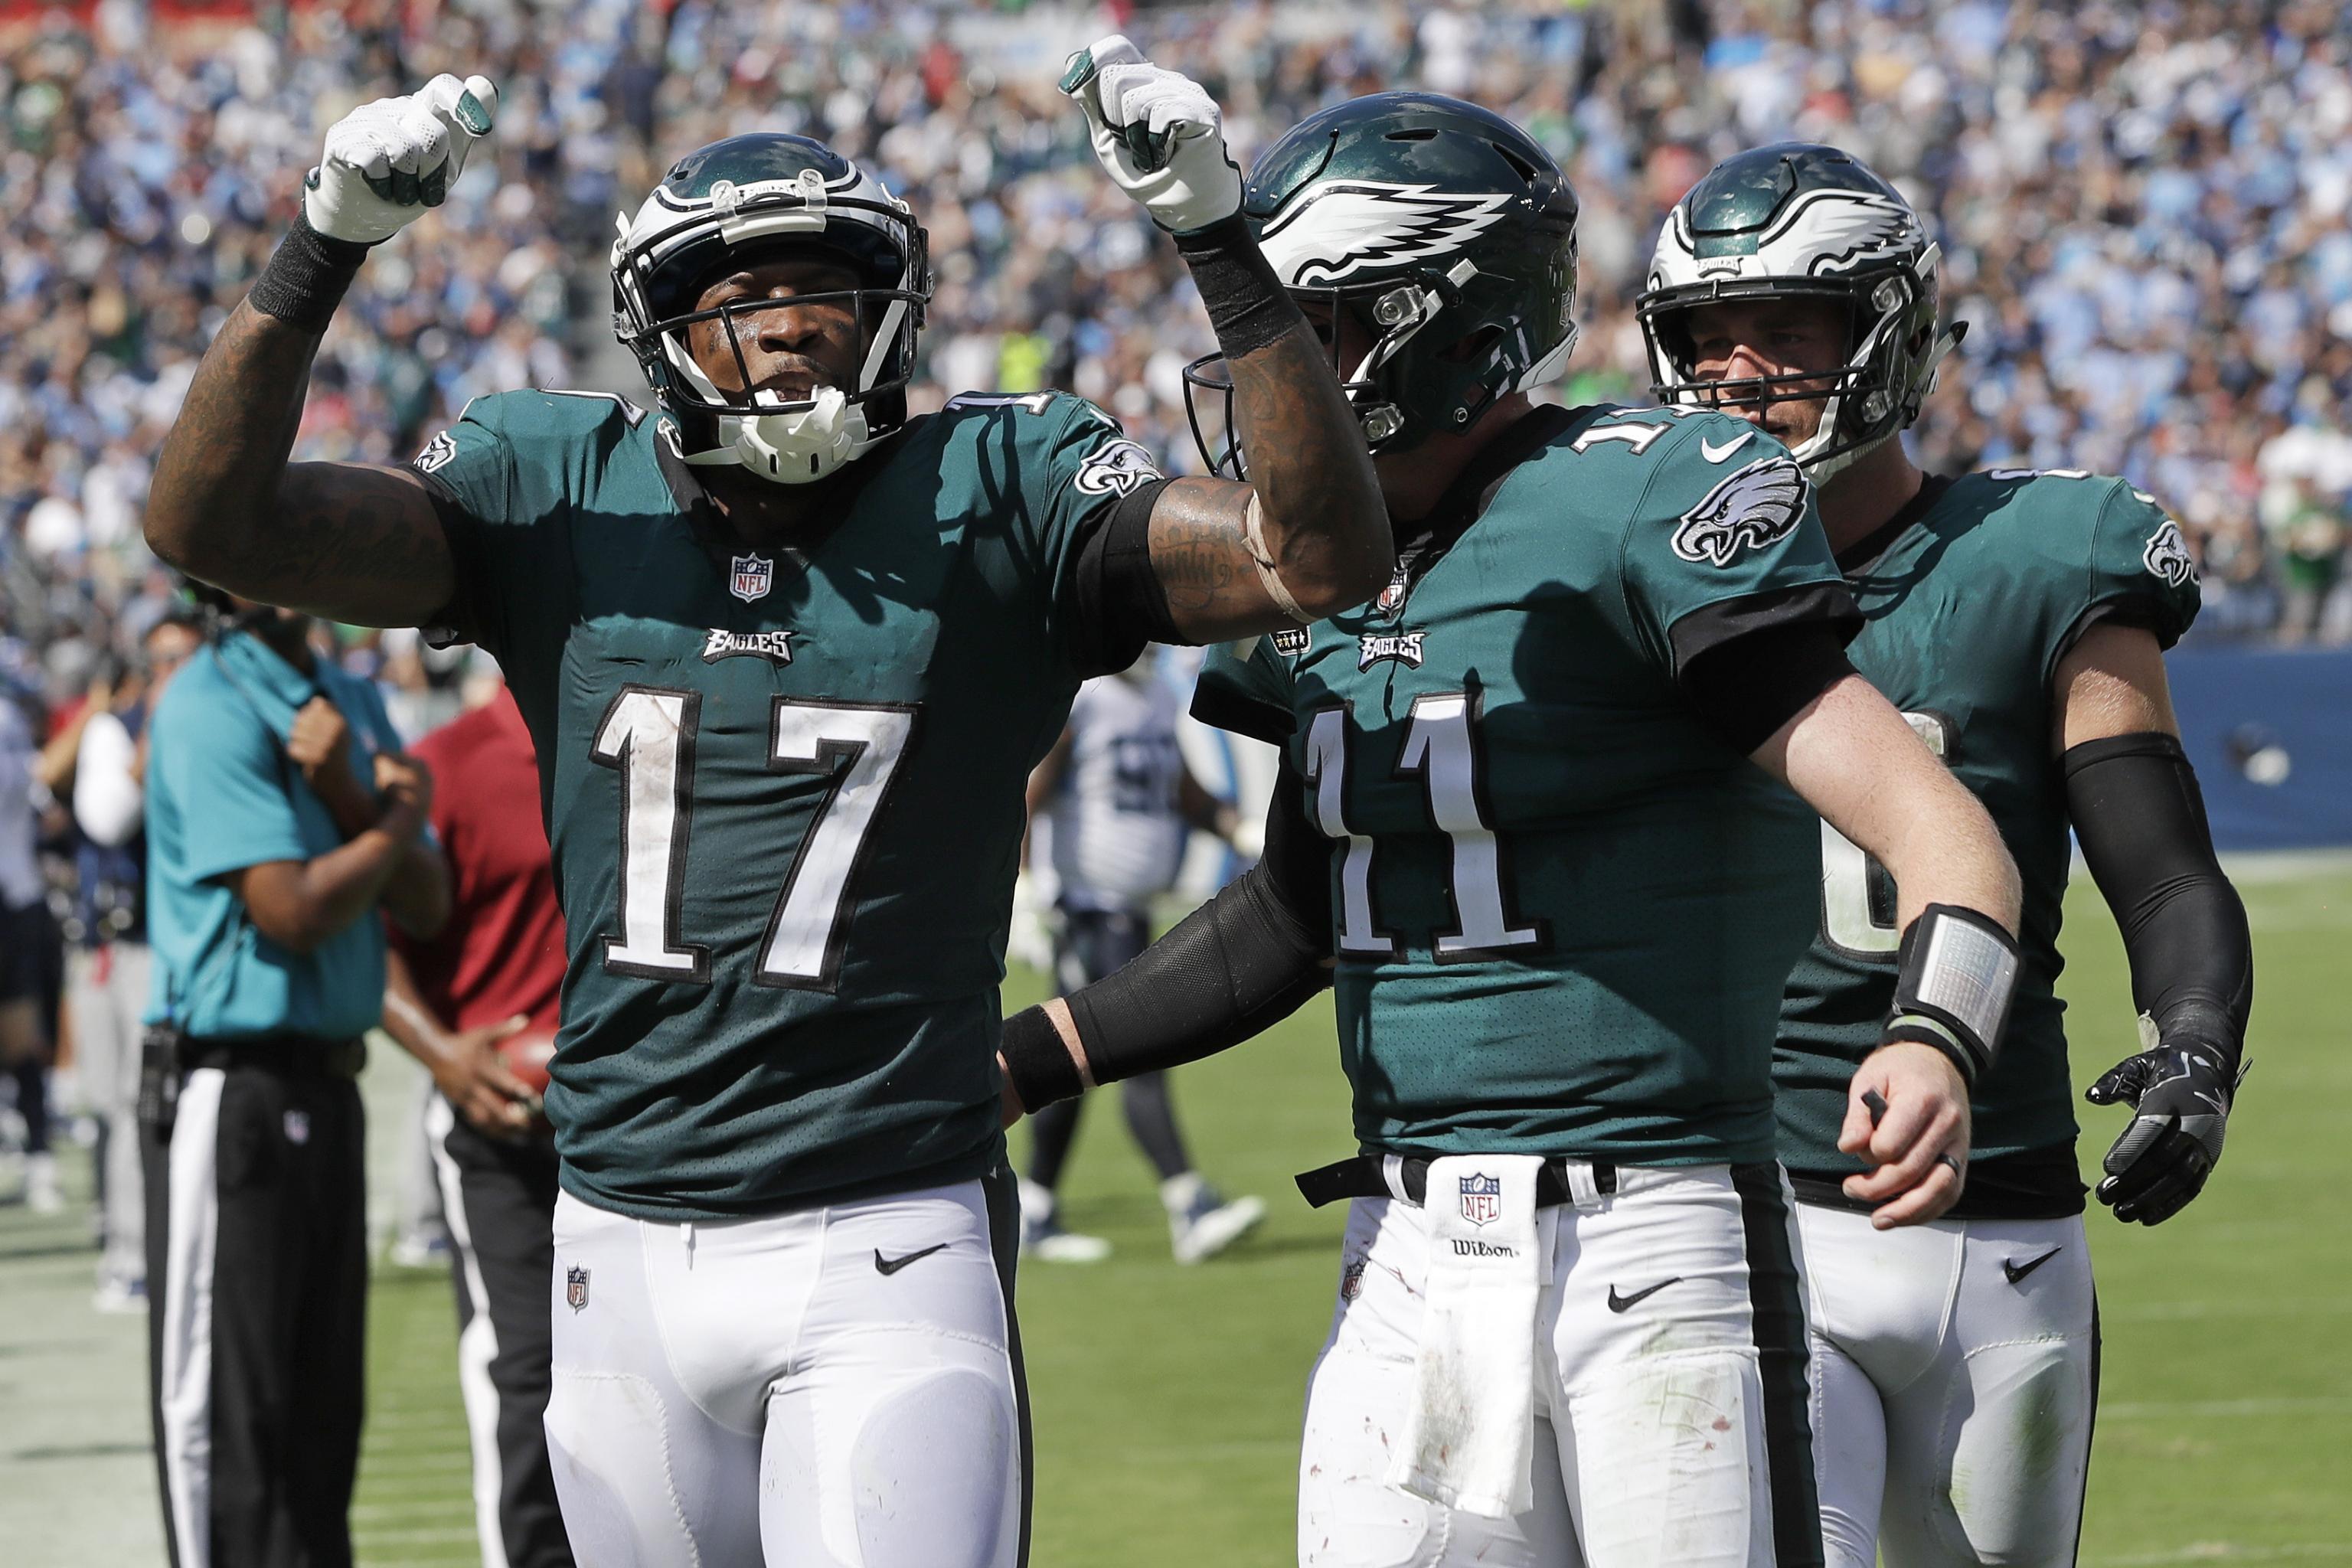 NFL Week 5 odds, lines: Eagles favored over Rams as Birds head out west